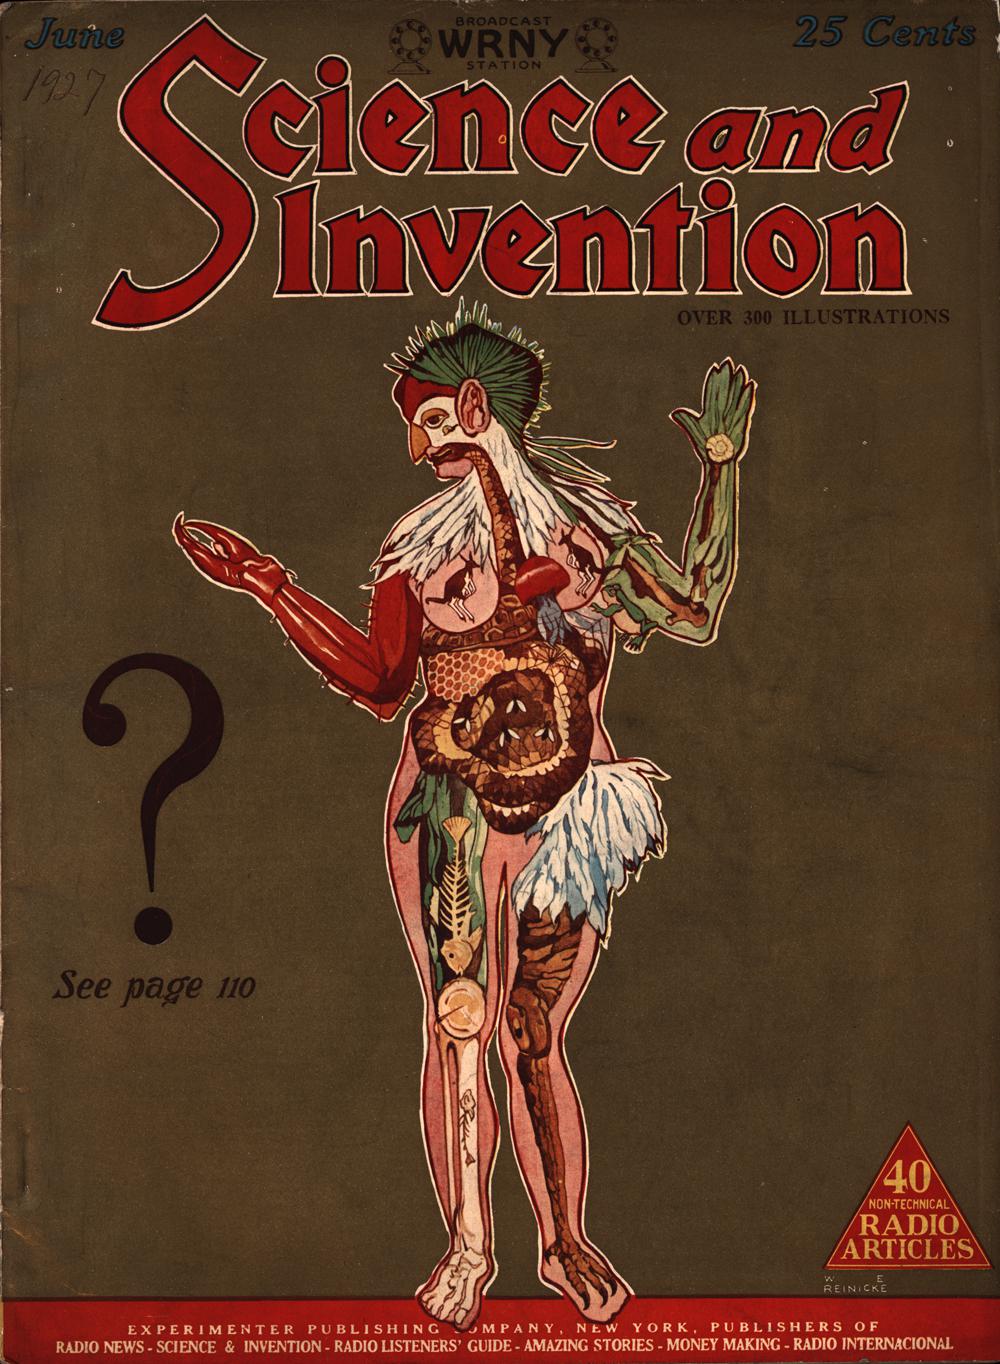 1927 - Science and invention - Vol. 15, No. 2